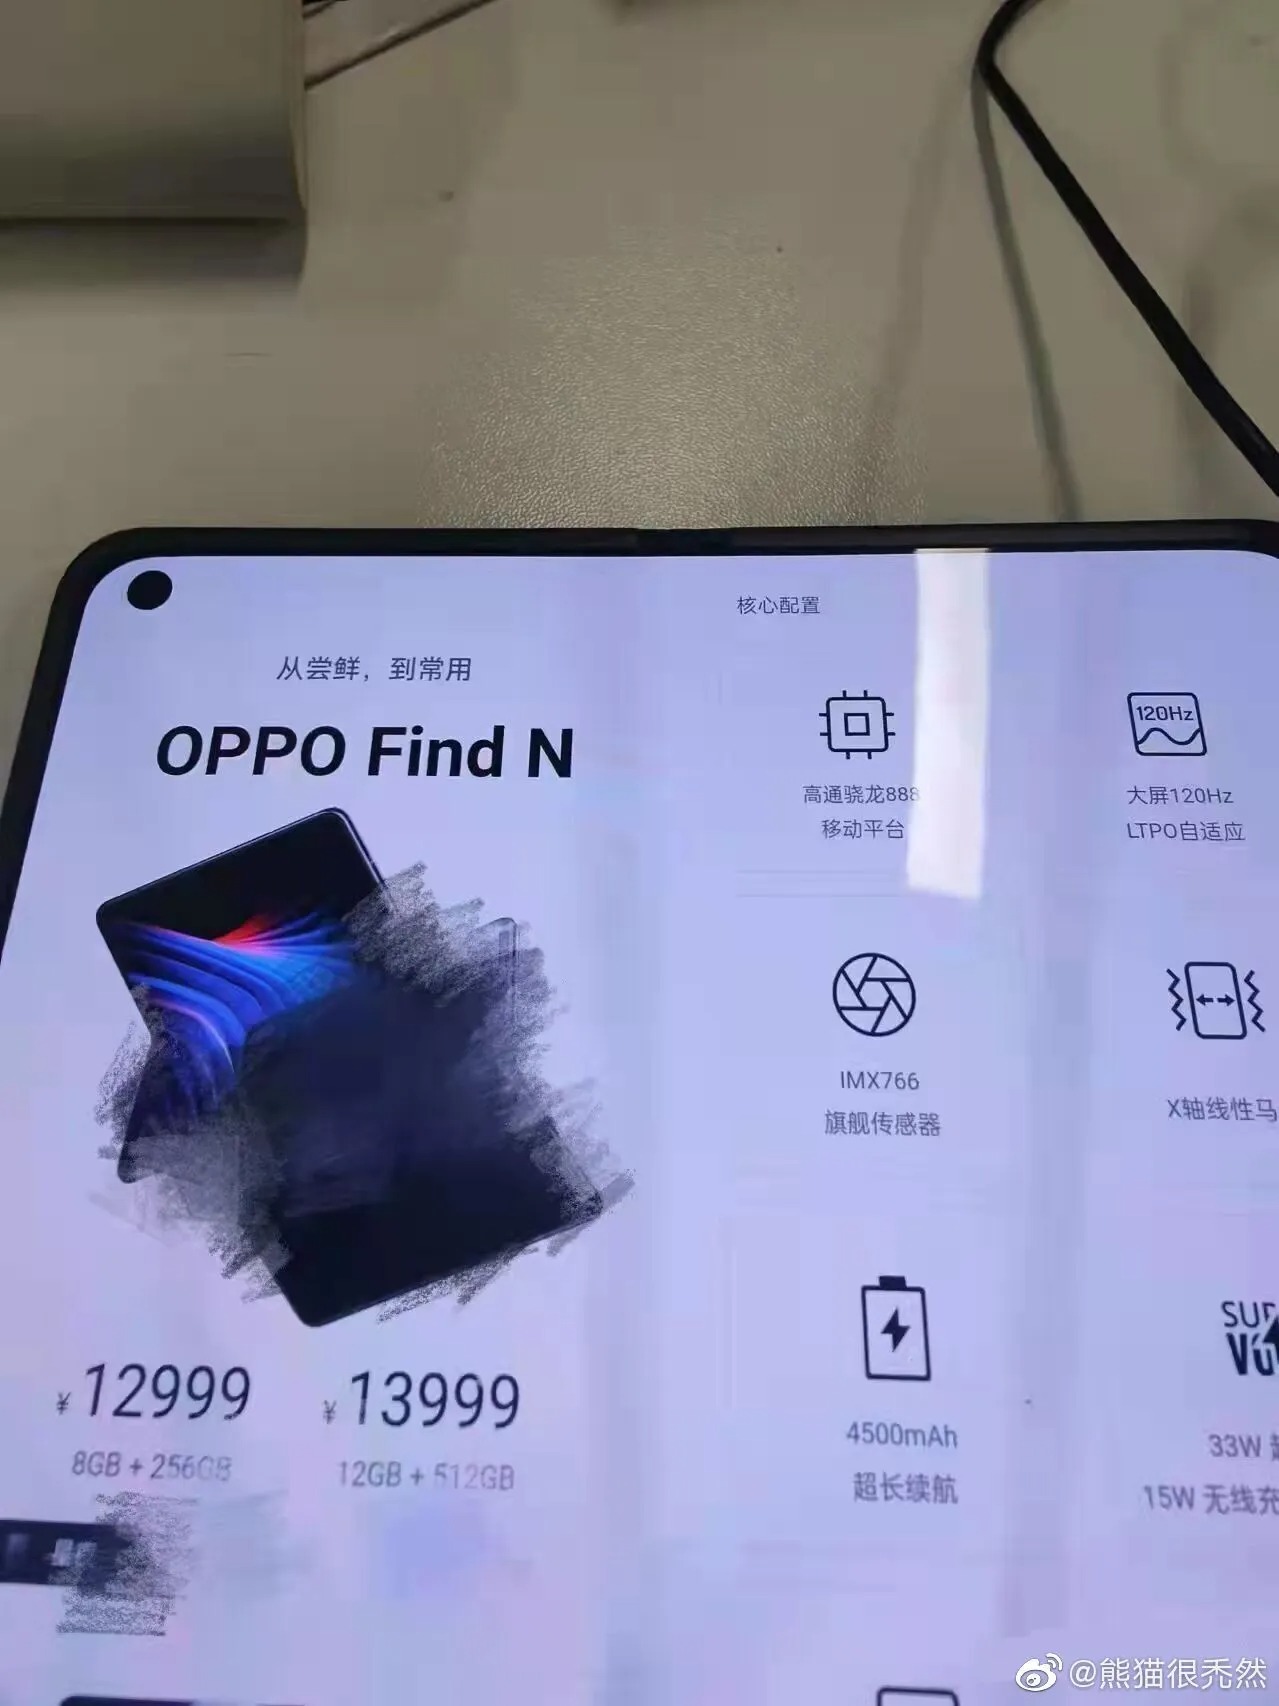 Oppo Find N foldable smartphone renders, price, specifications LEAKED